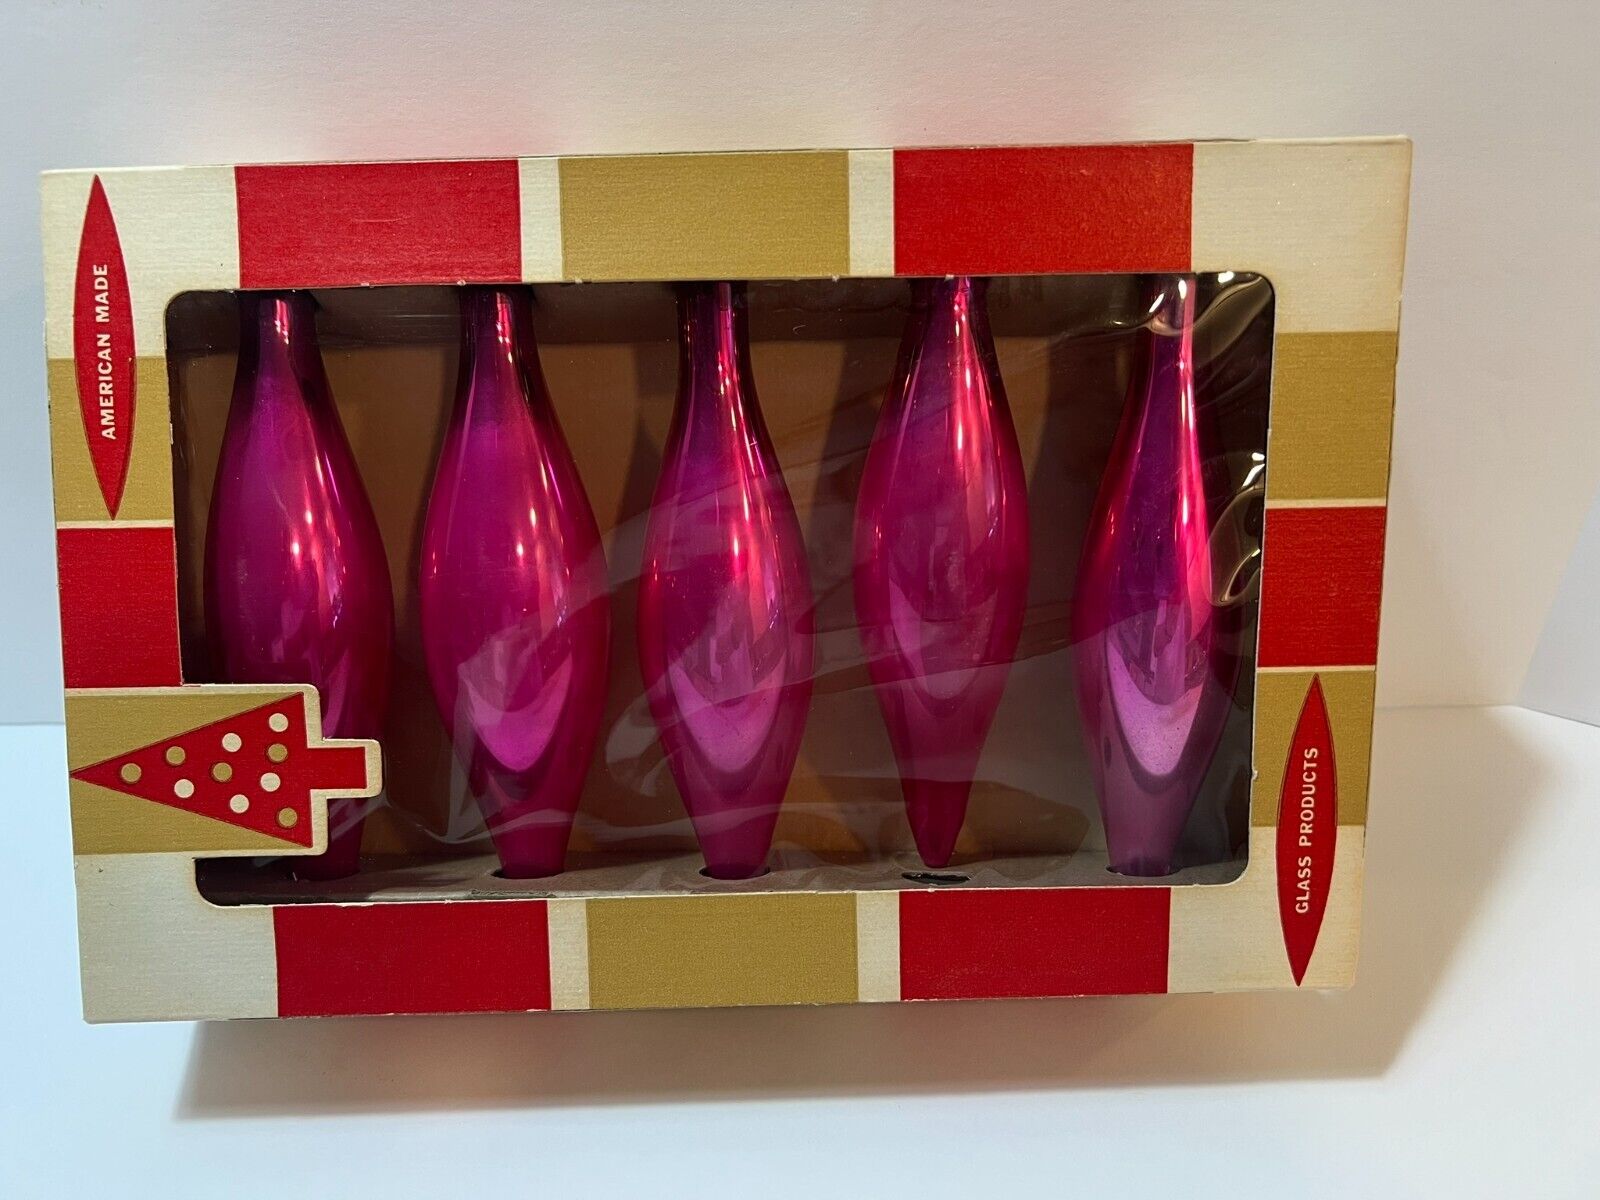 VTG Coby Glass Christmas Tree Ornaments Set Of 5 Magenta / Pink Teardrops 4.5 in